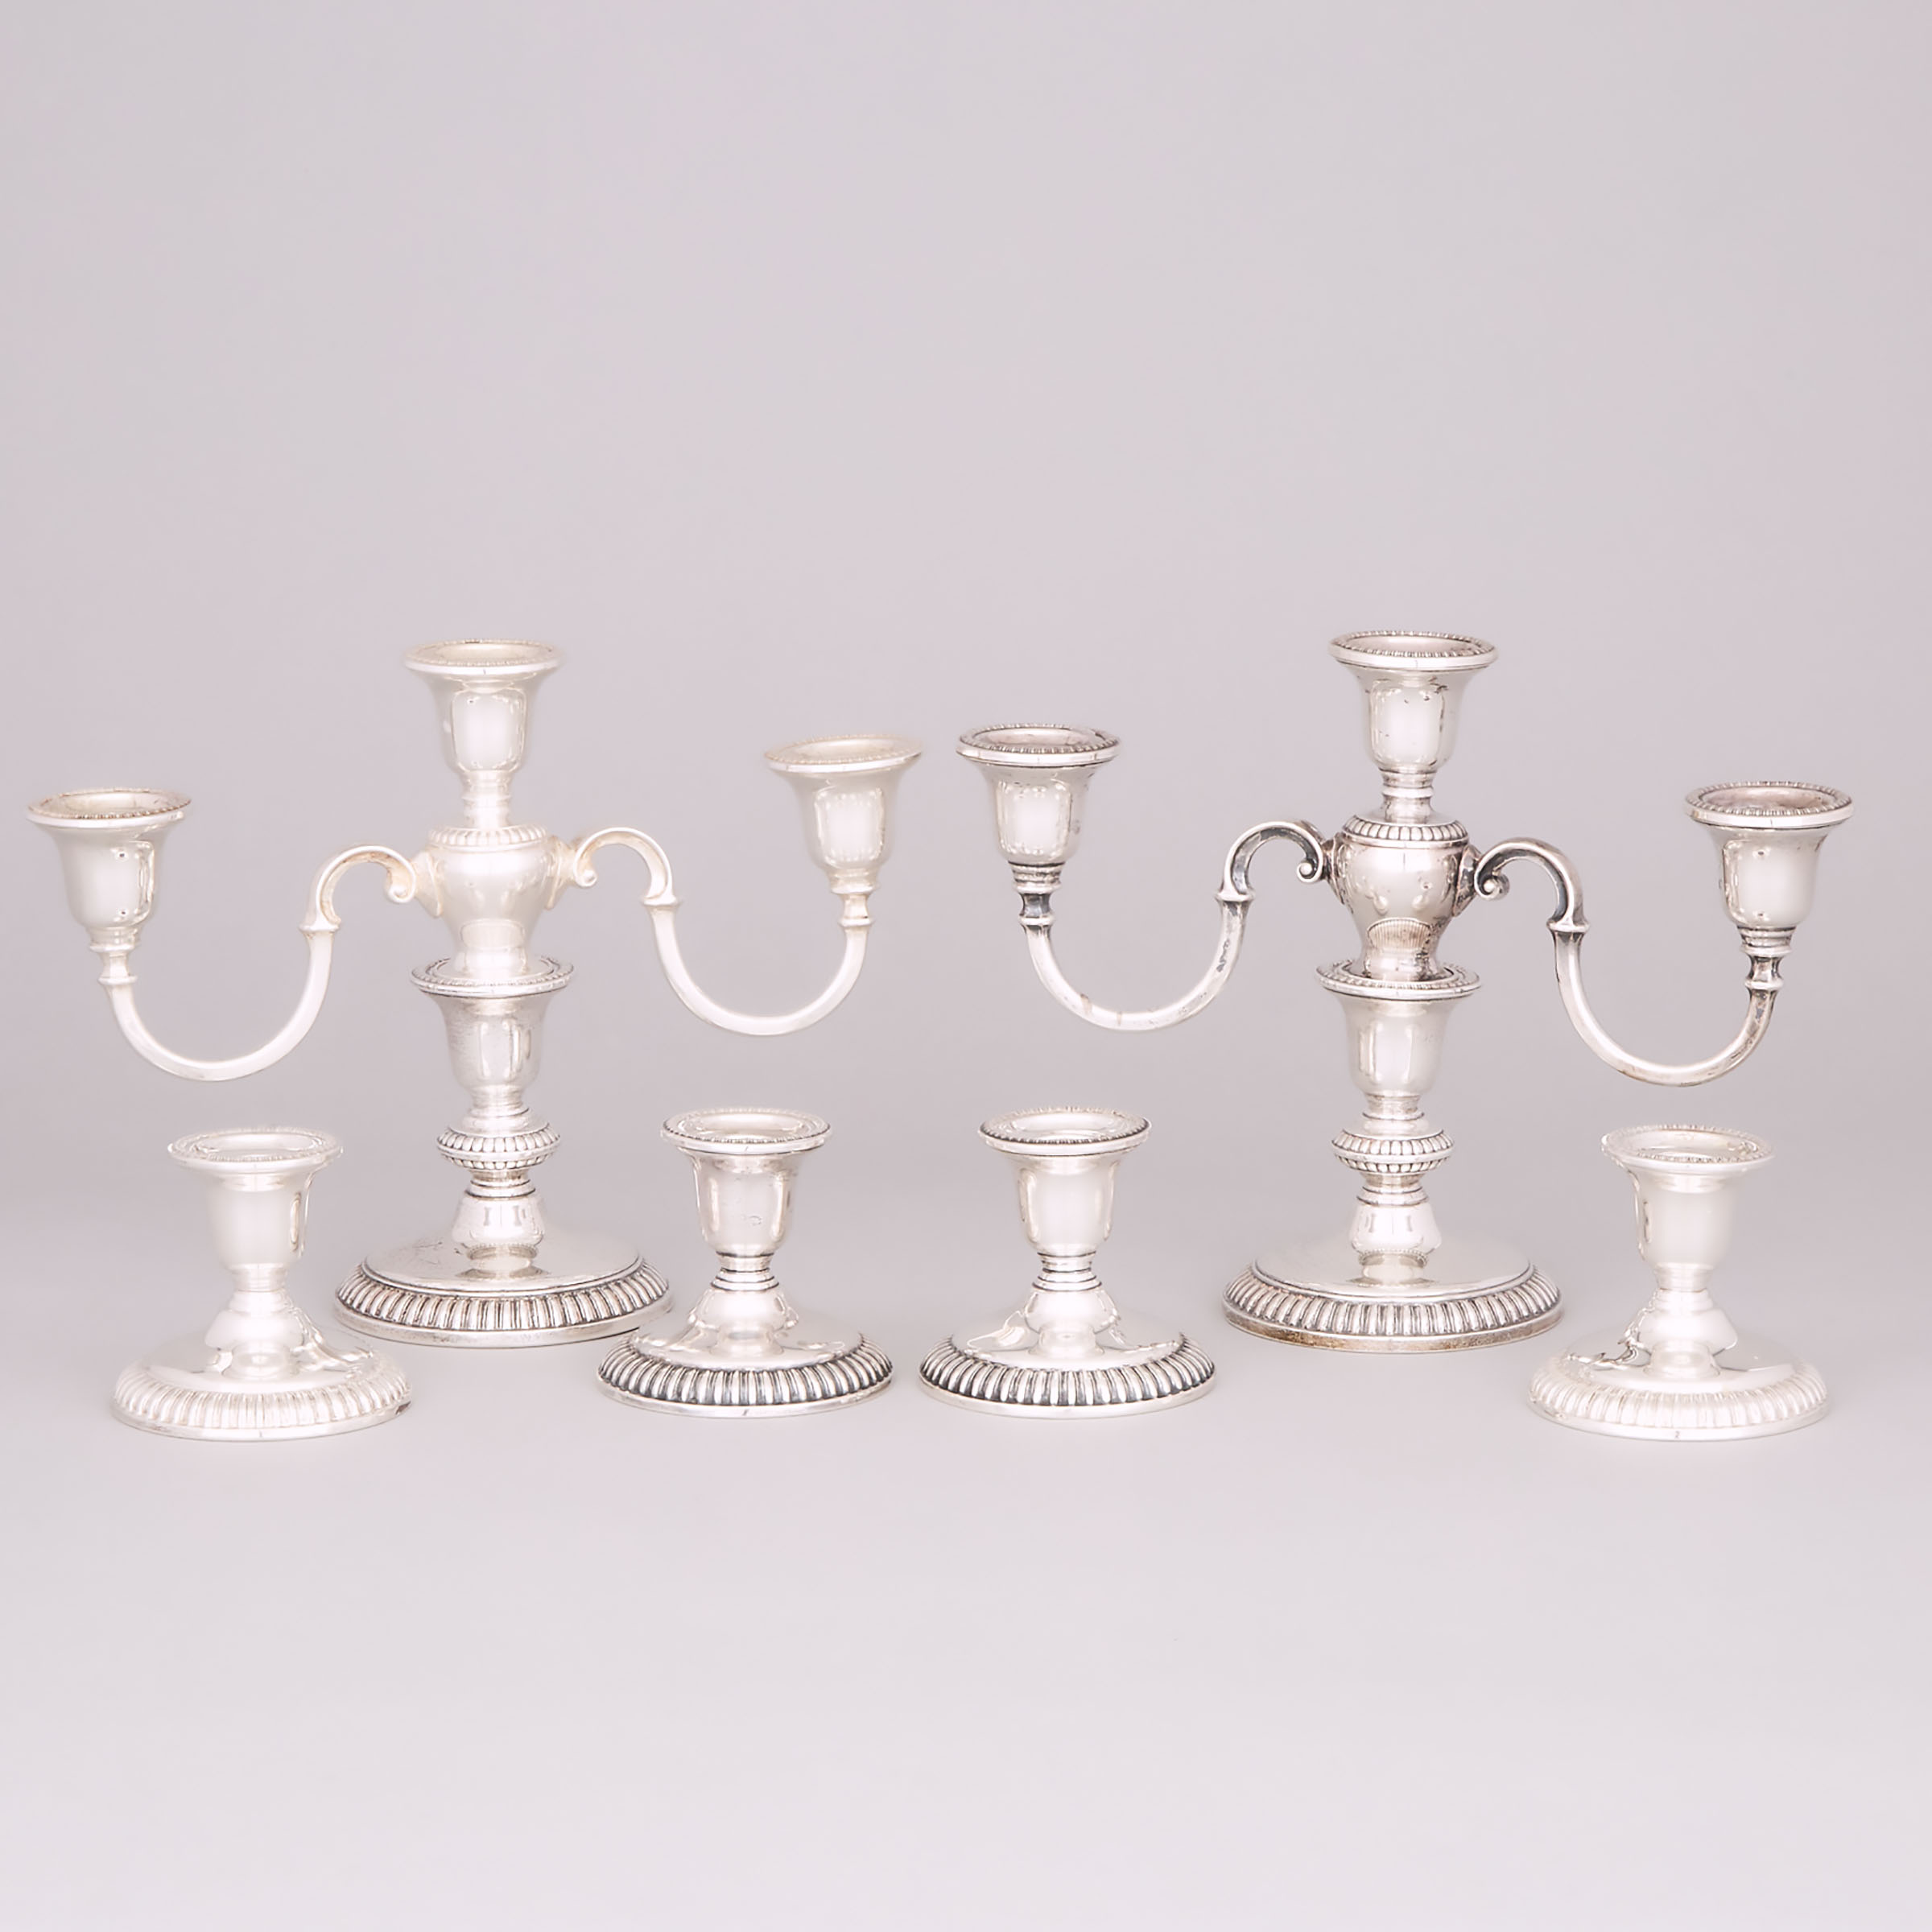 Two Canadian Silver Three-Light Candelabra and Four Low Candlesticks, Henry Birks & Sons, Montreal, Que., 20th century